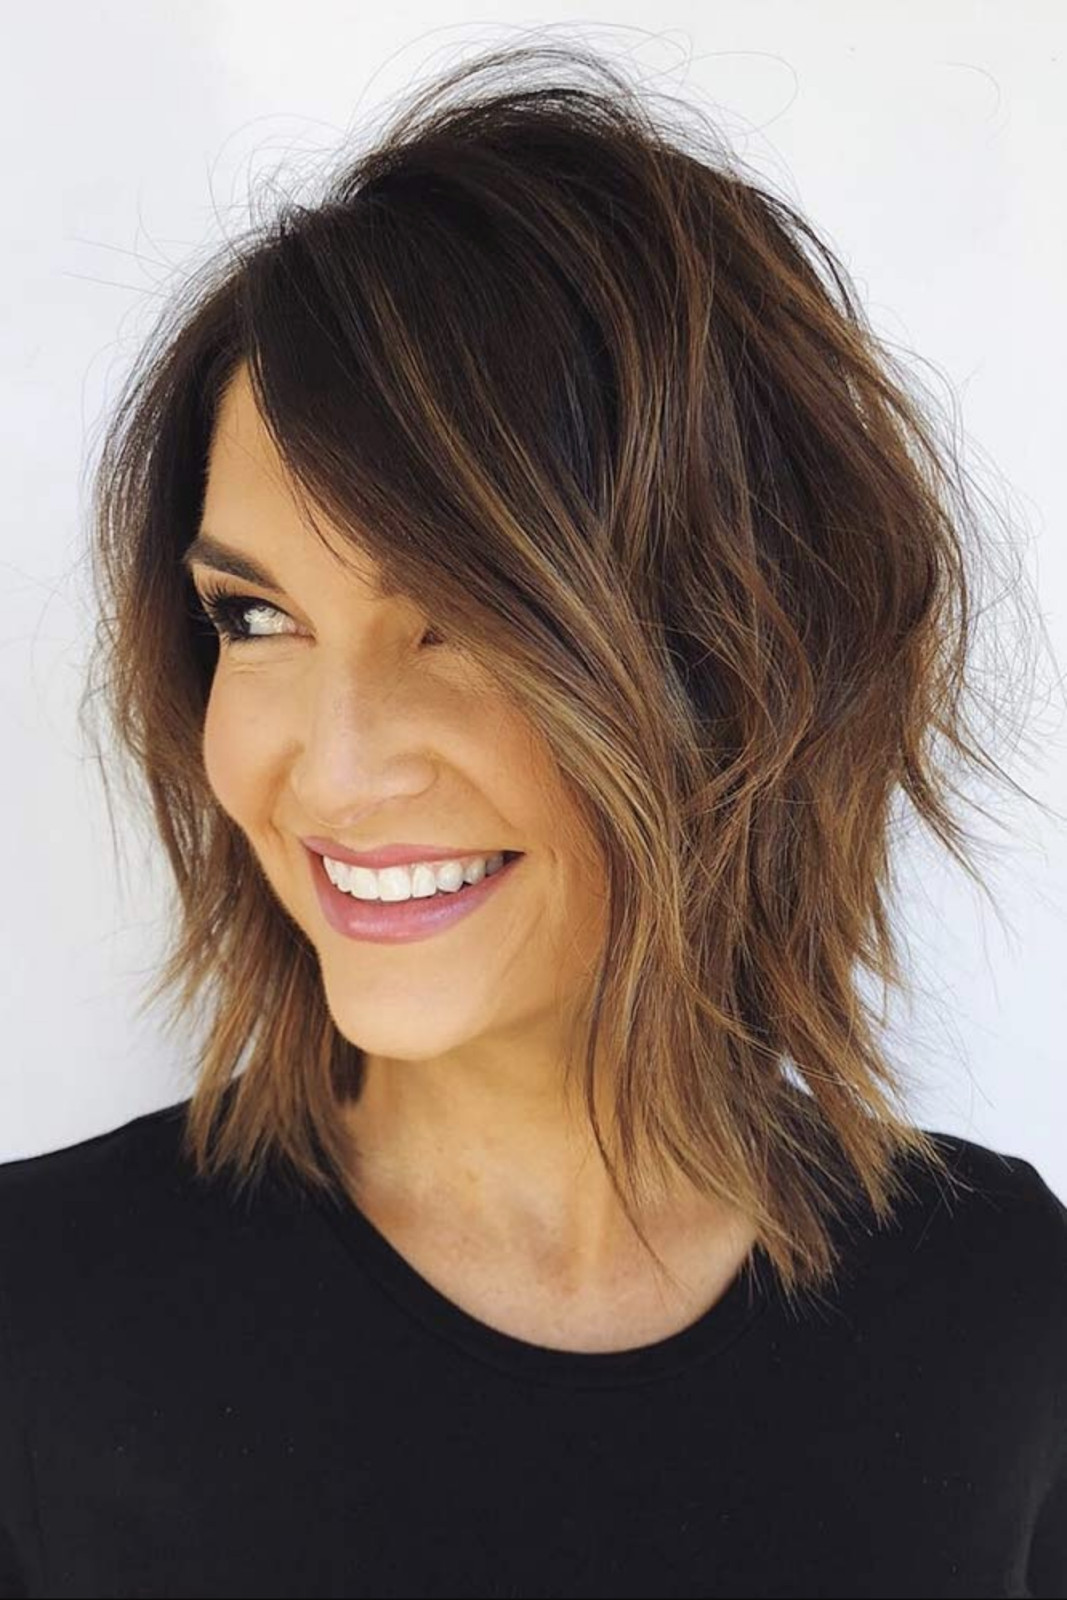 New Hairstyles For 2020 Women
 2019 2020 Short Hairstyles for Women Over 50 That Are